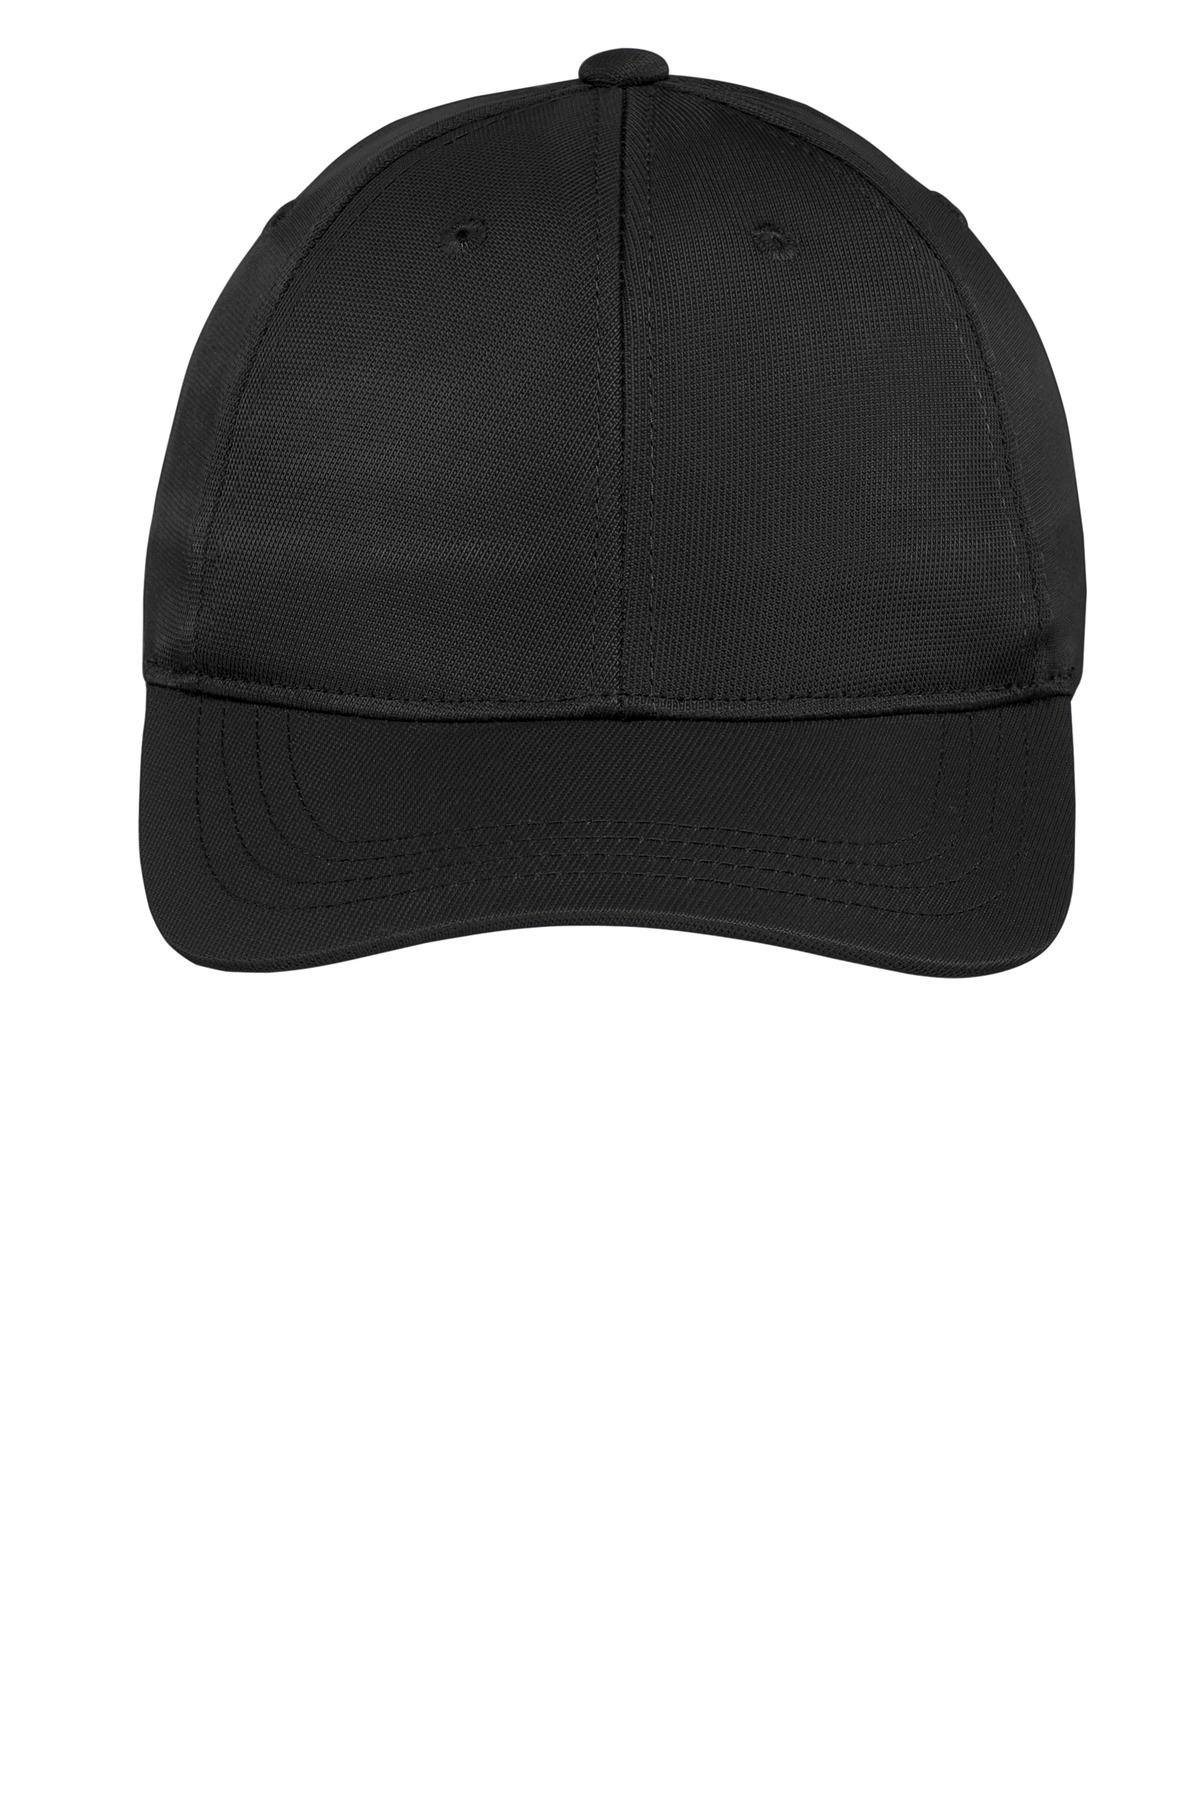 I'm looking for a cap that would fit a toddler. Would this cap work?